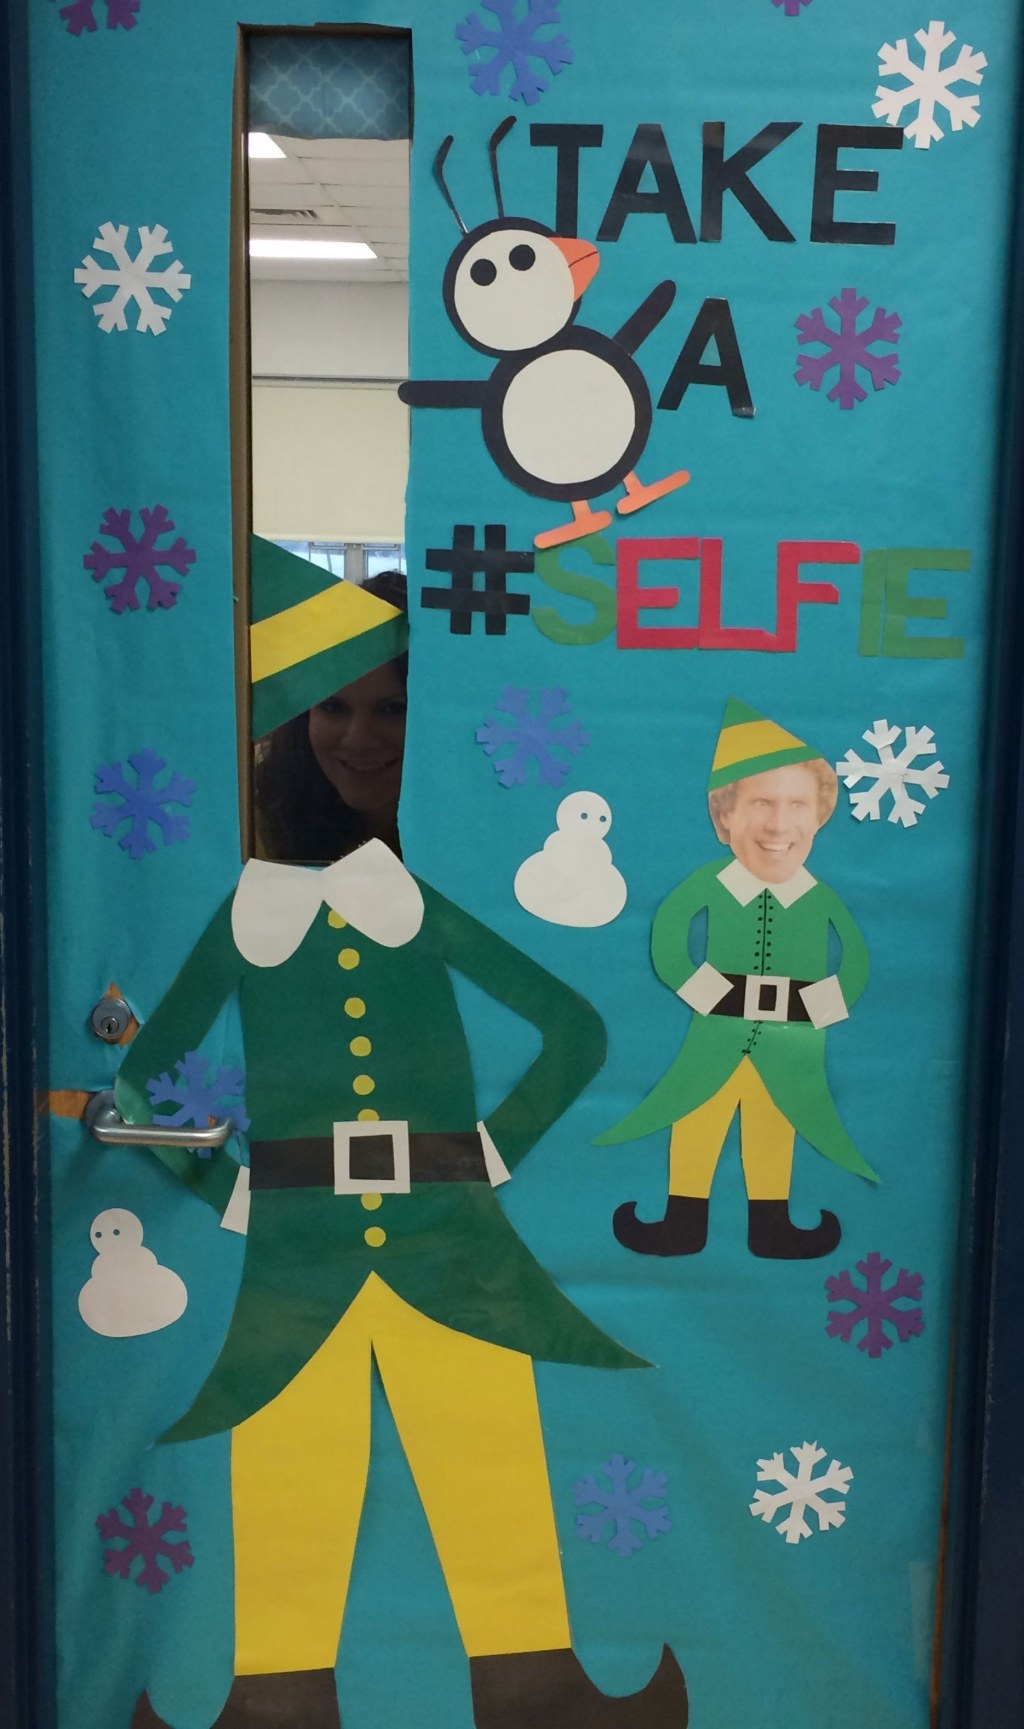 Picture of: Christmas door ideas, selfie, Buddy the elf, education  Christmas